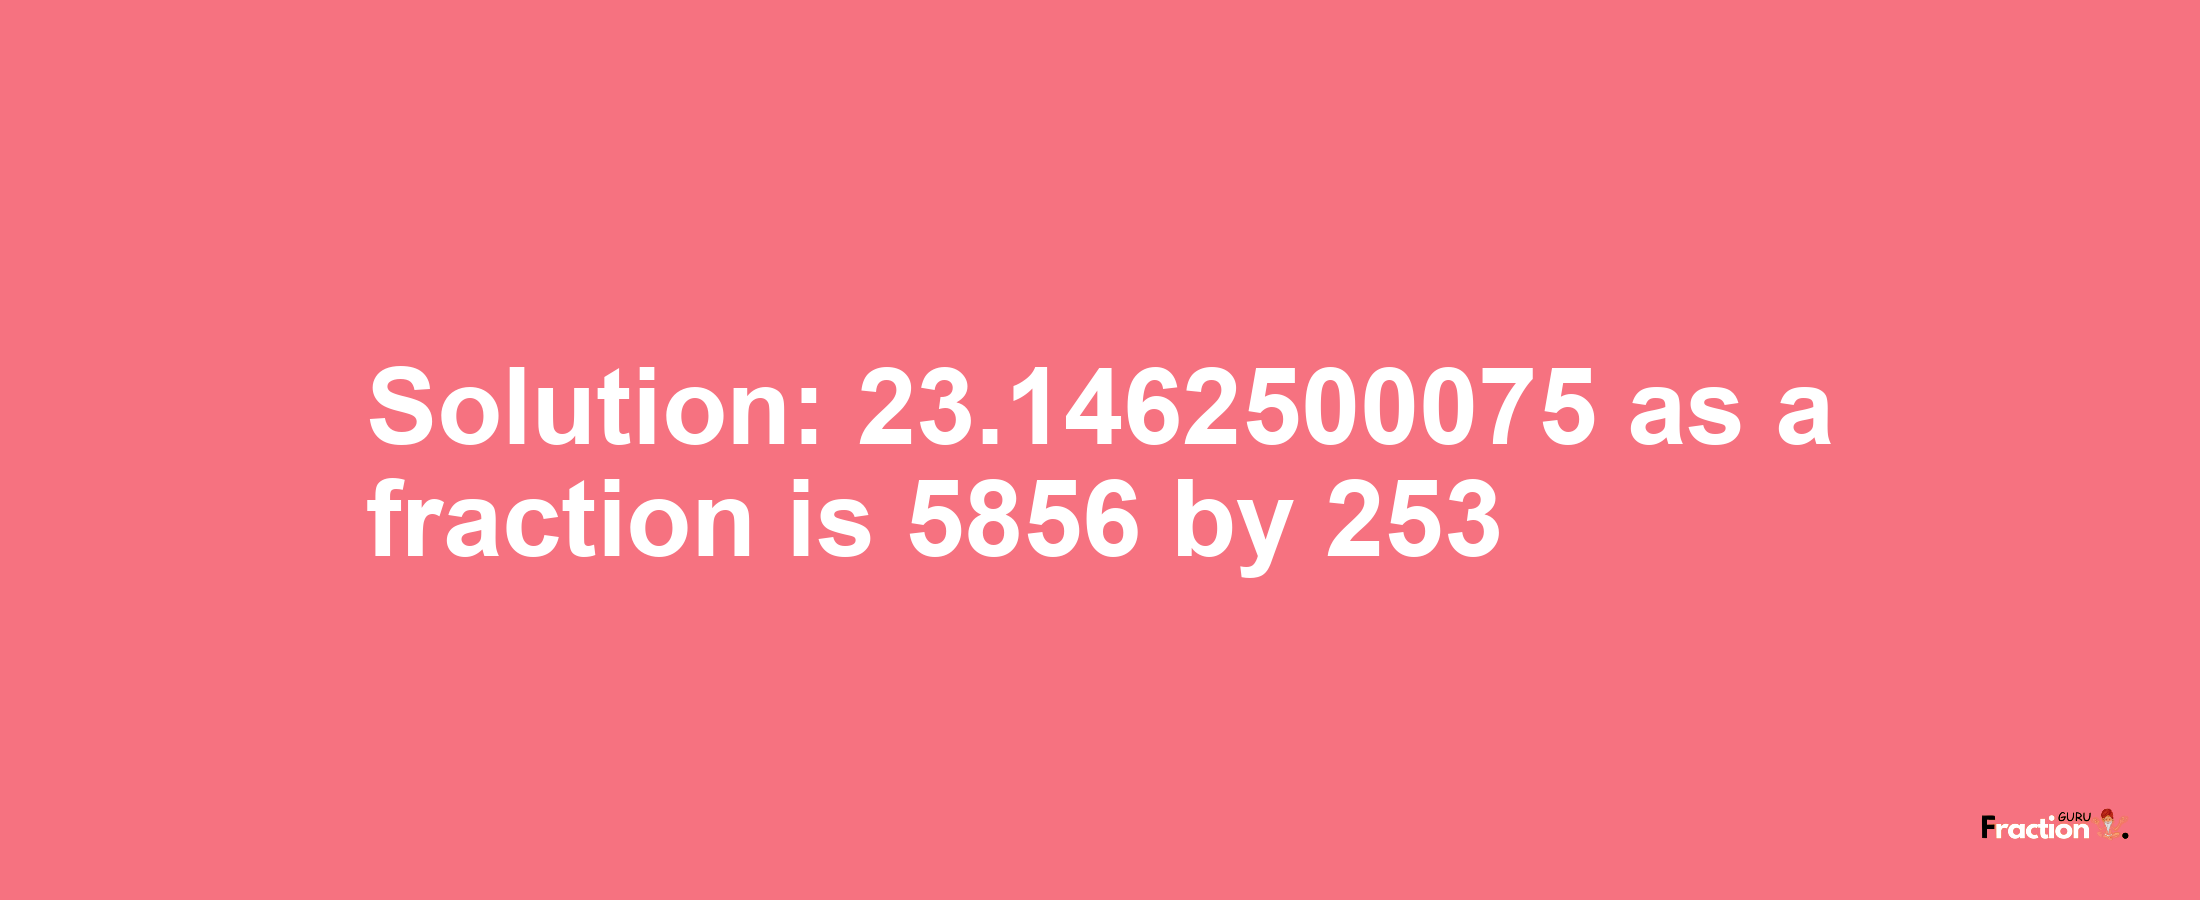 Solution:23.1462500075 as a fraction is 5856/253